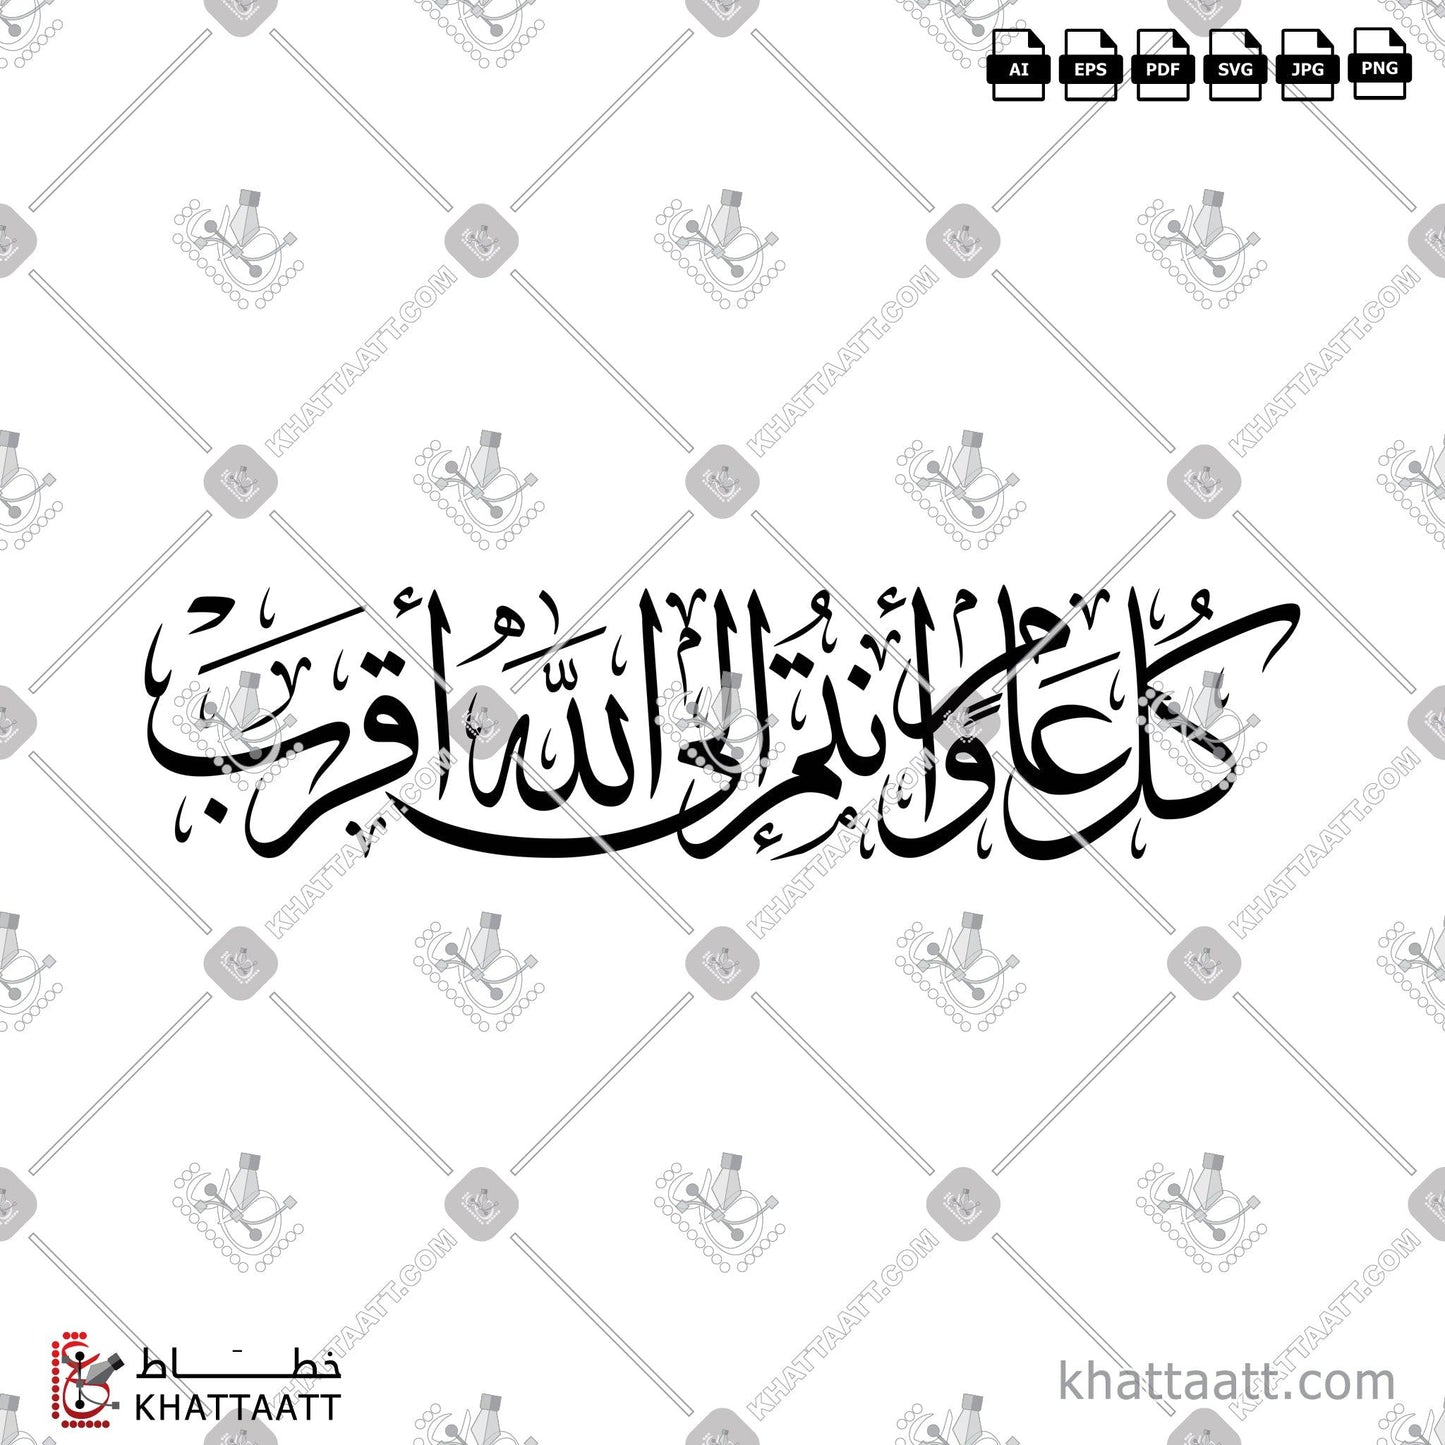 Download Arabic Calligraphy of كل عام وأنتم إلى الله أقرب in Thuluth - خط الثلث in vector and .png